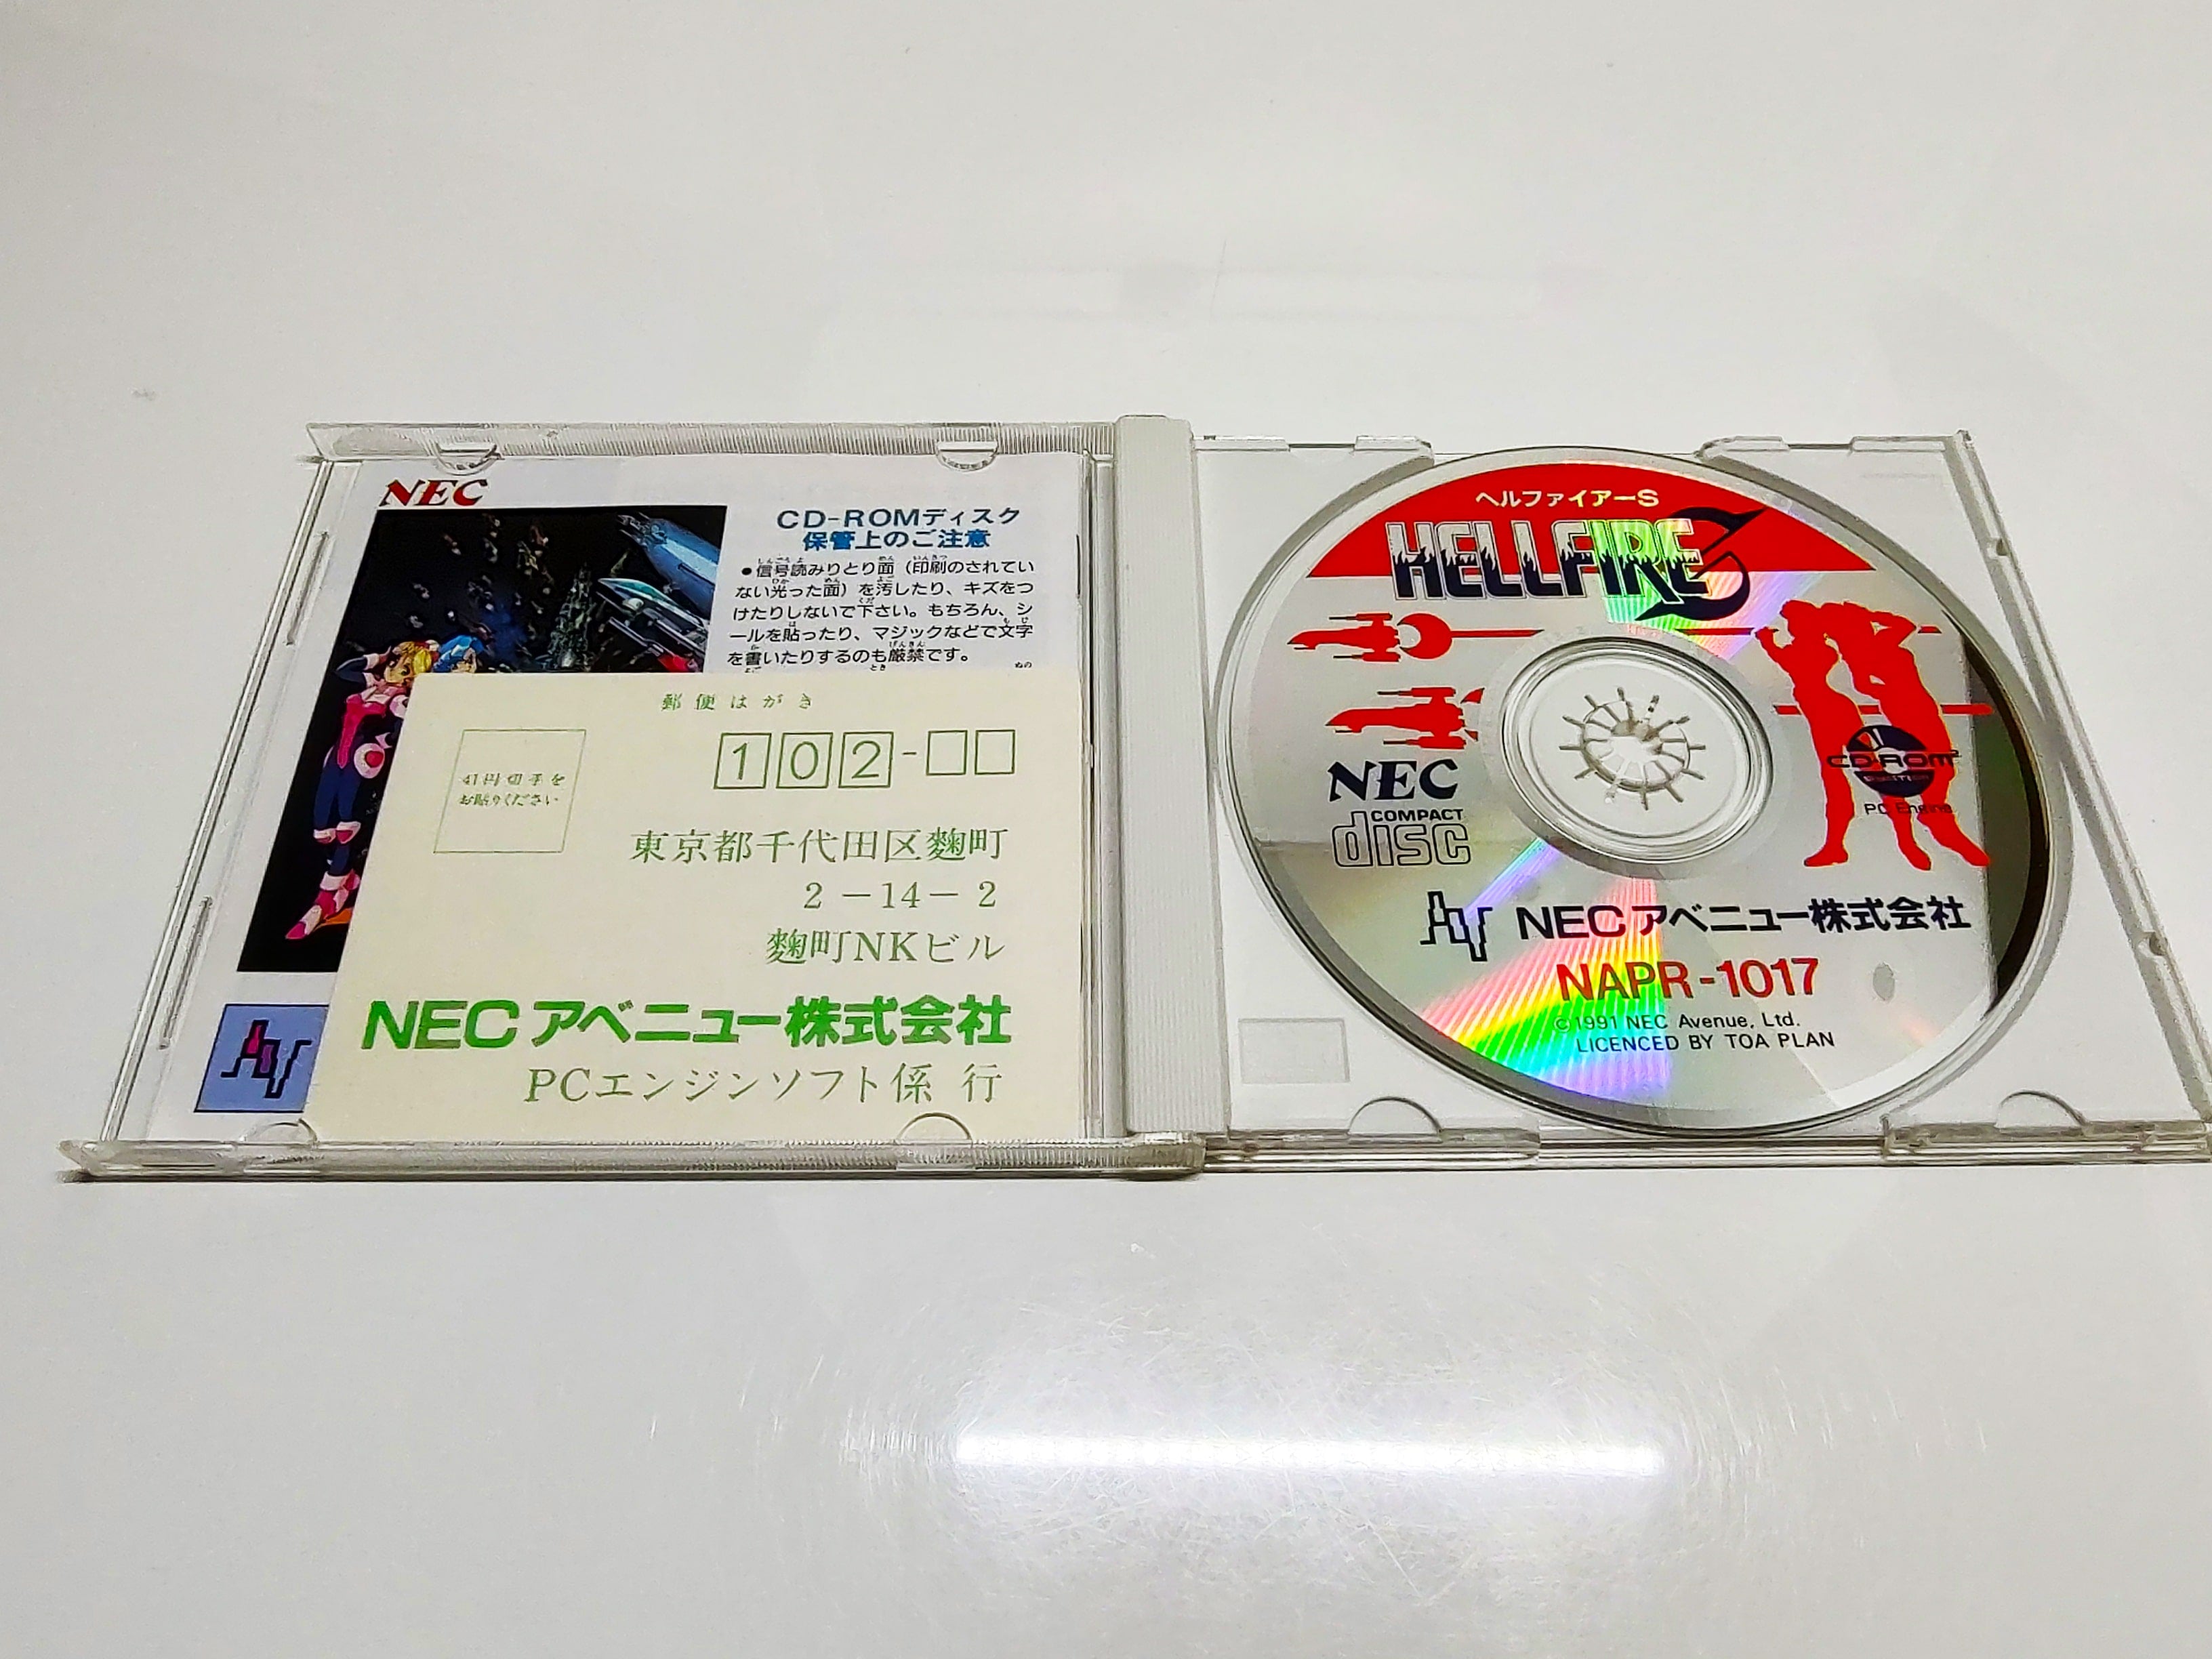 Hellfire S: The Another Story | PC Engine | Manual, registration card and disc